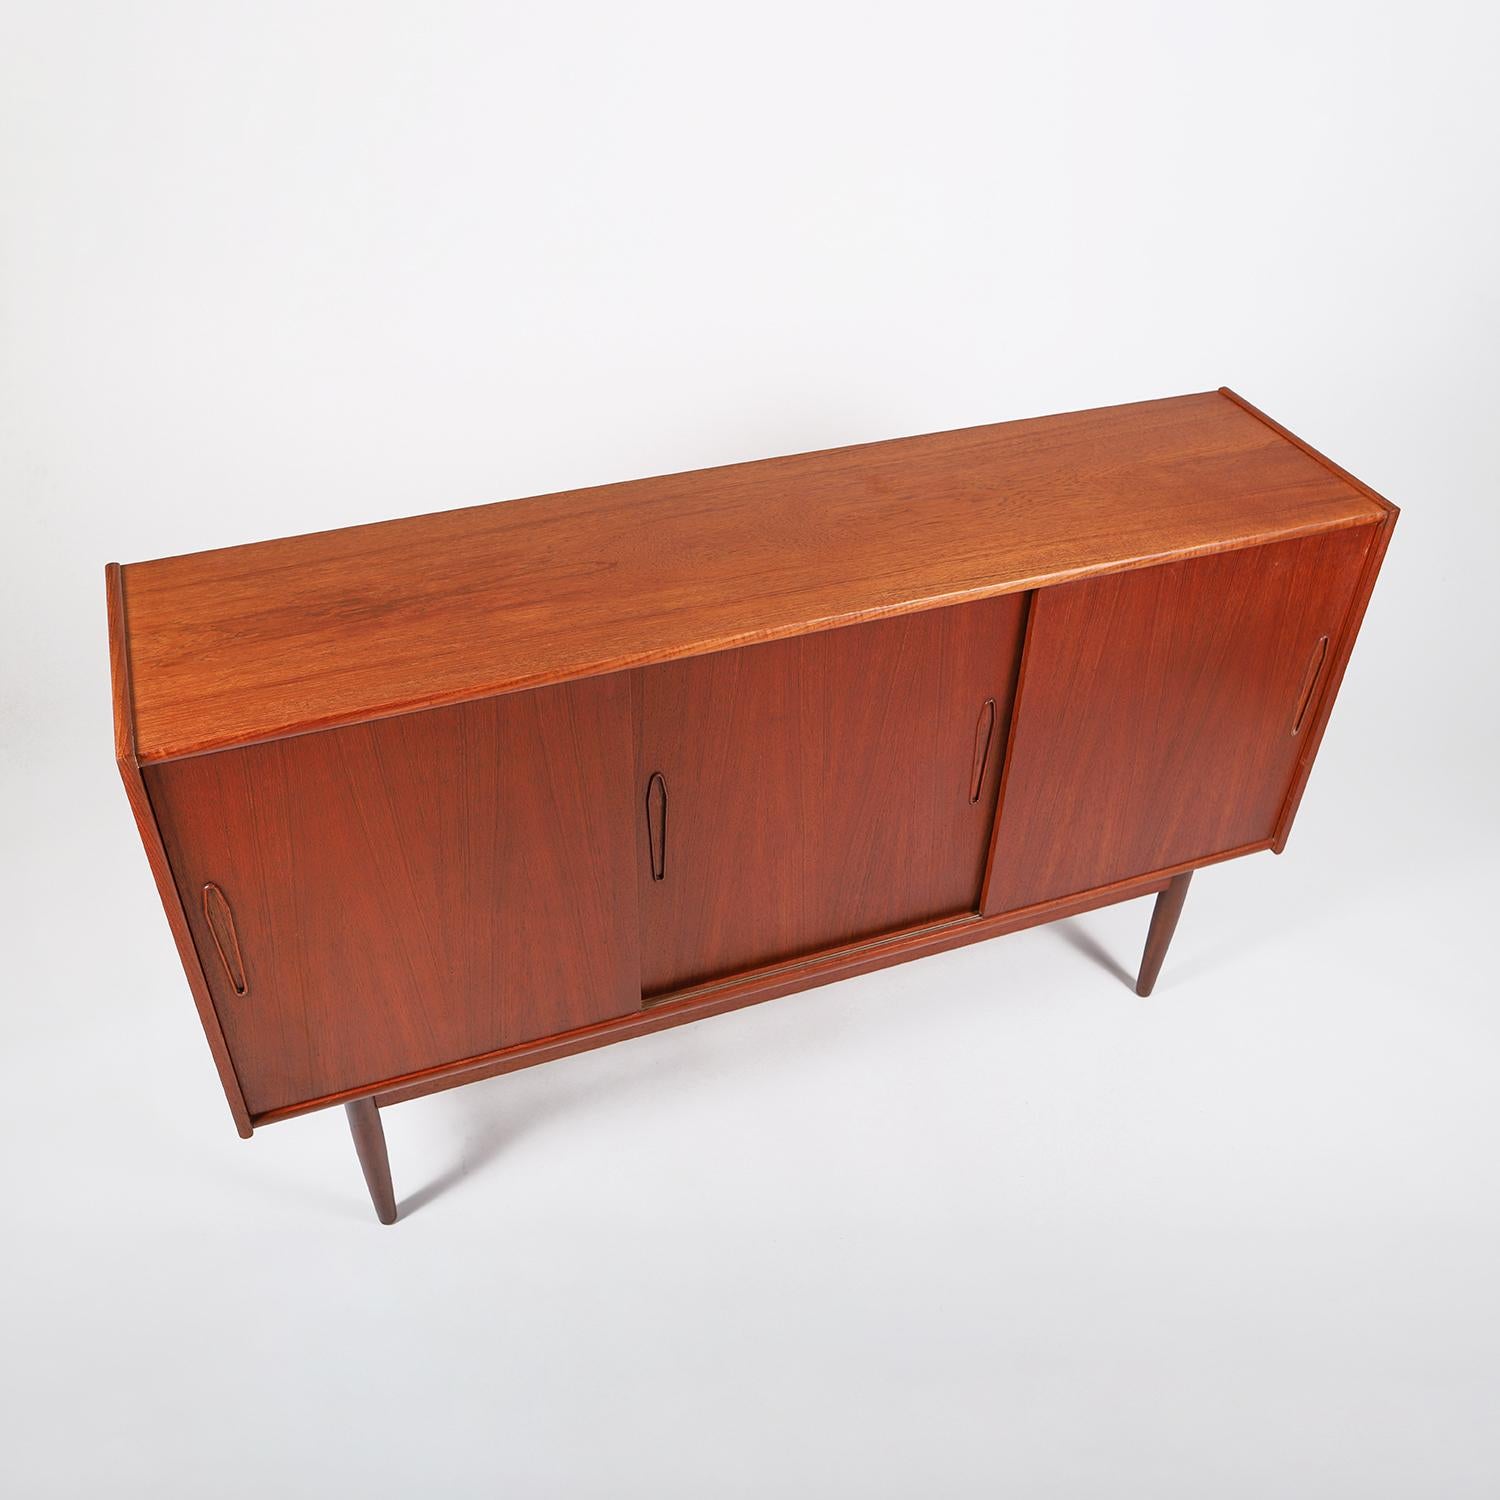 A vintage original Scandinavian Modern sideboard in rich old growth teak with a traditional oil finish. Turned legs, sliding doors with diamond shaped pulls, adjustable shelves, interior etched glass mirrored bar and beechwood trimmed silver